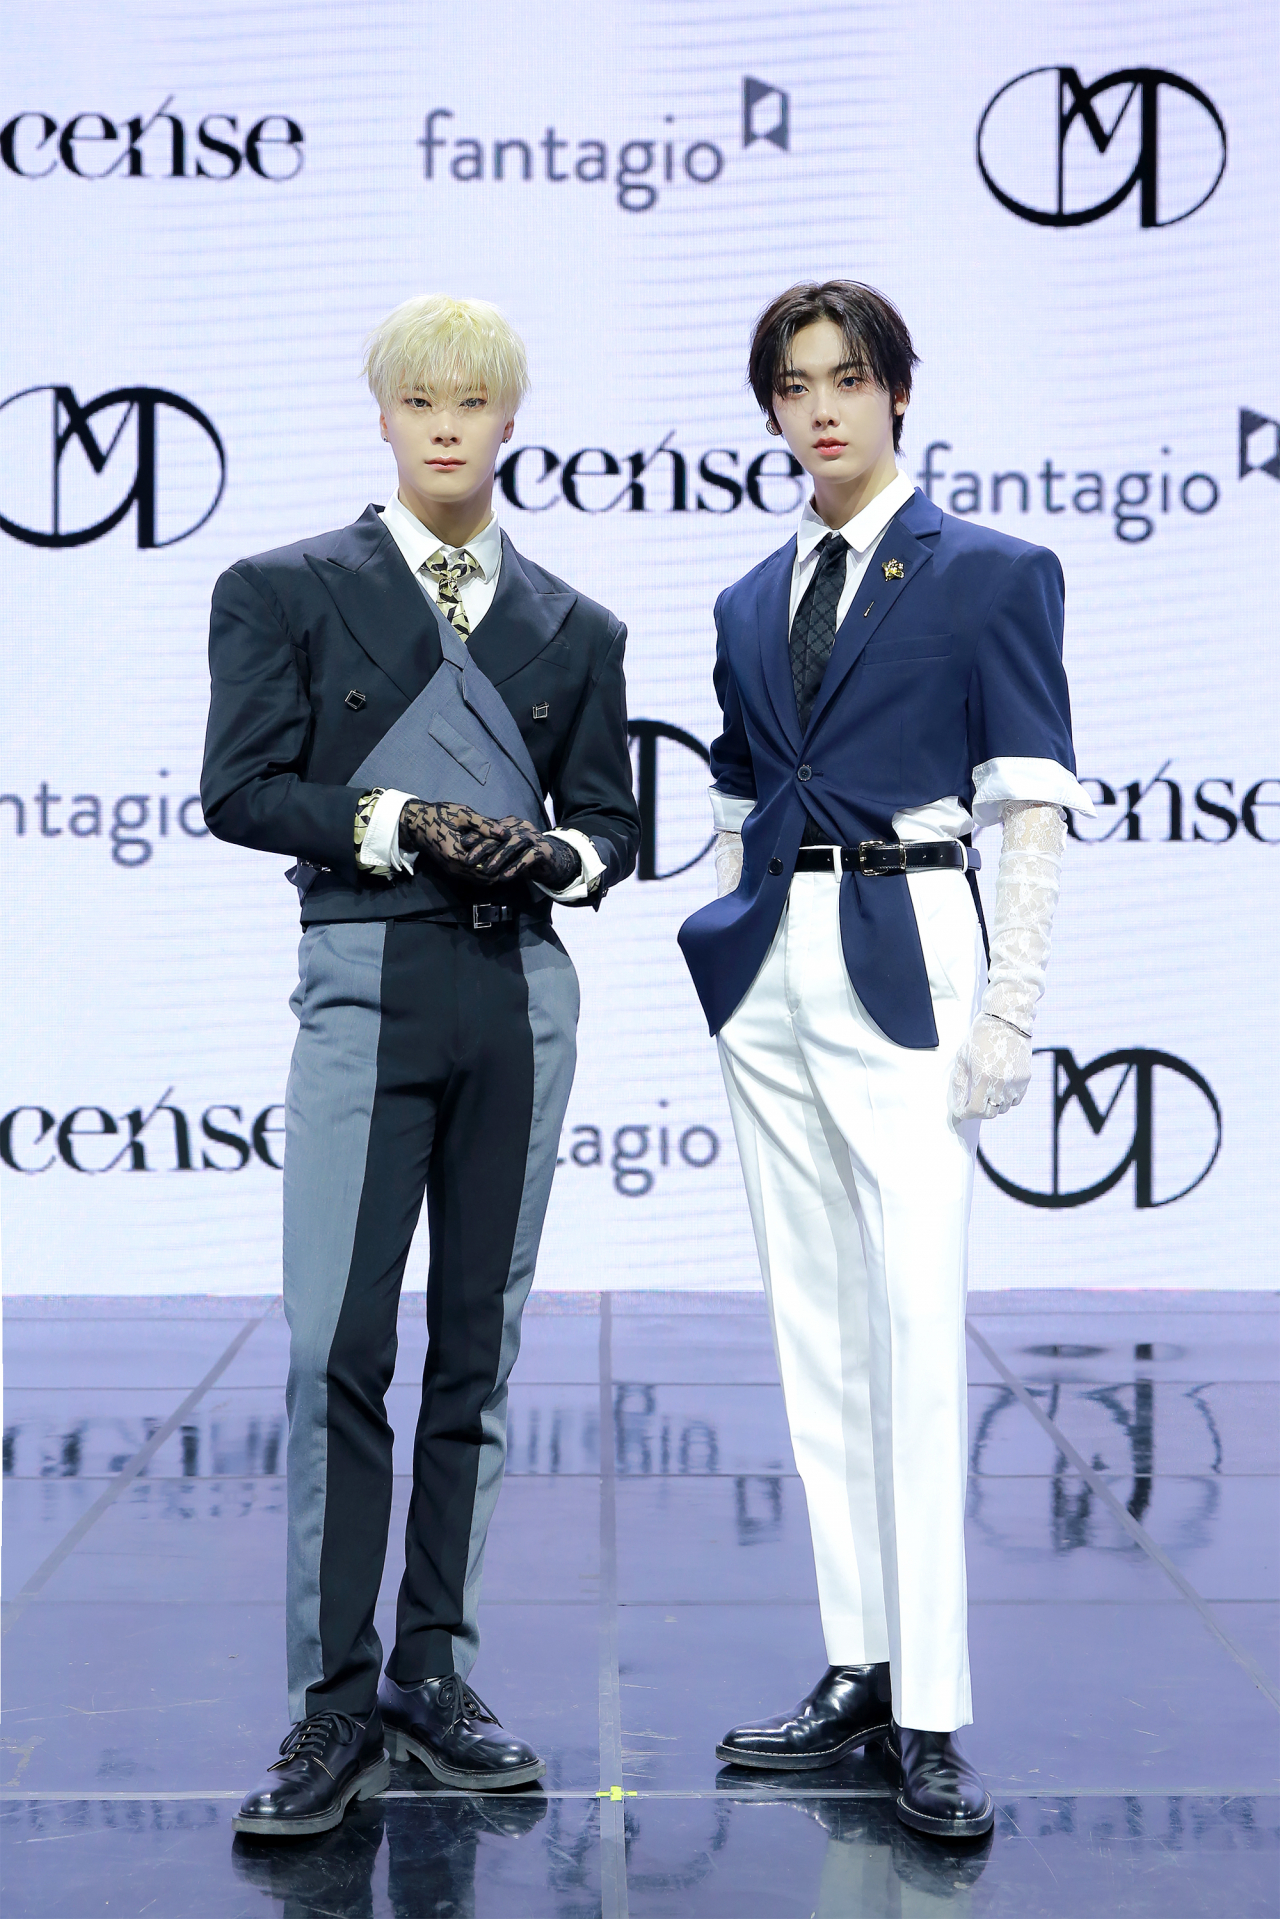 Moonbin (left) and Sanha of Astro pose for a picture at the media showcase for their third unit album, 